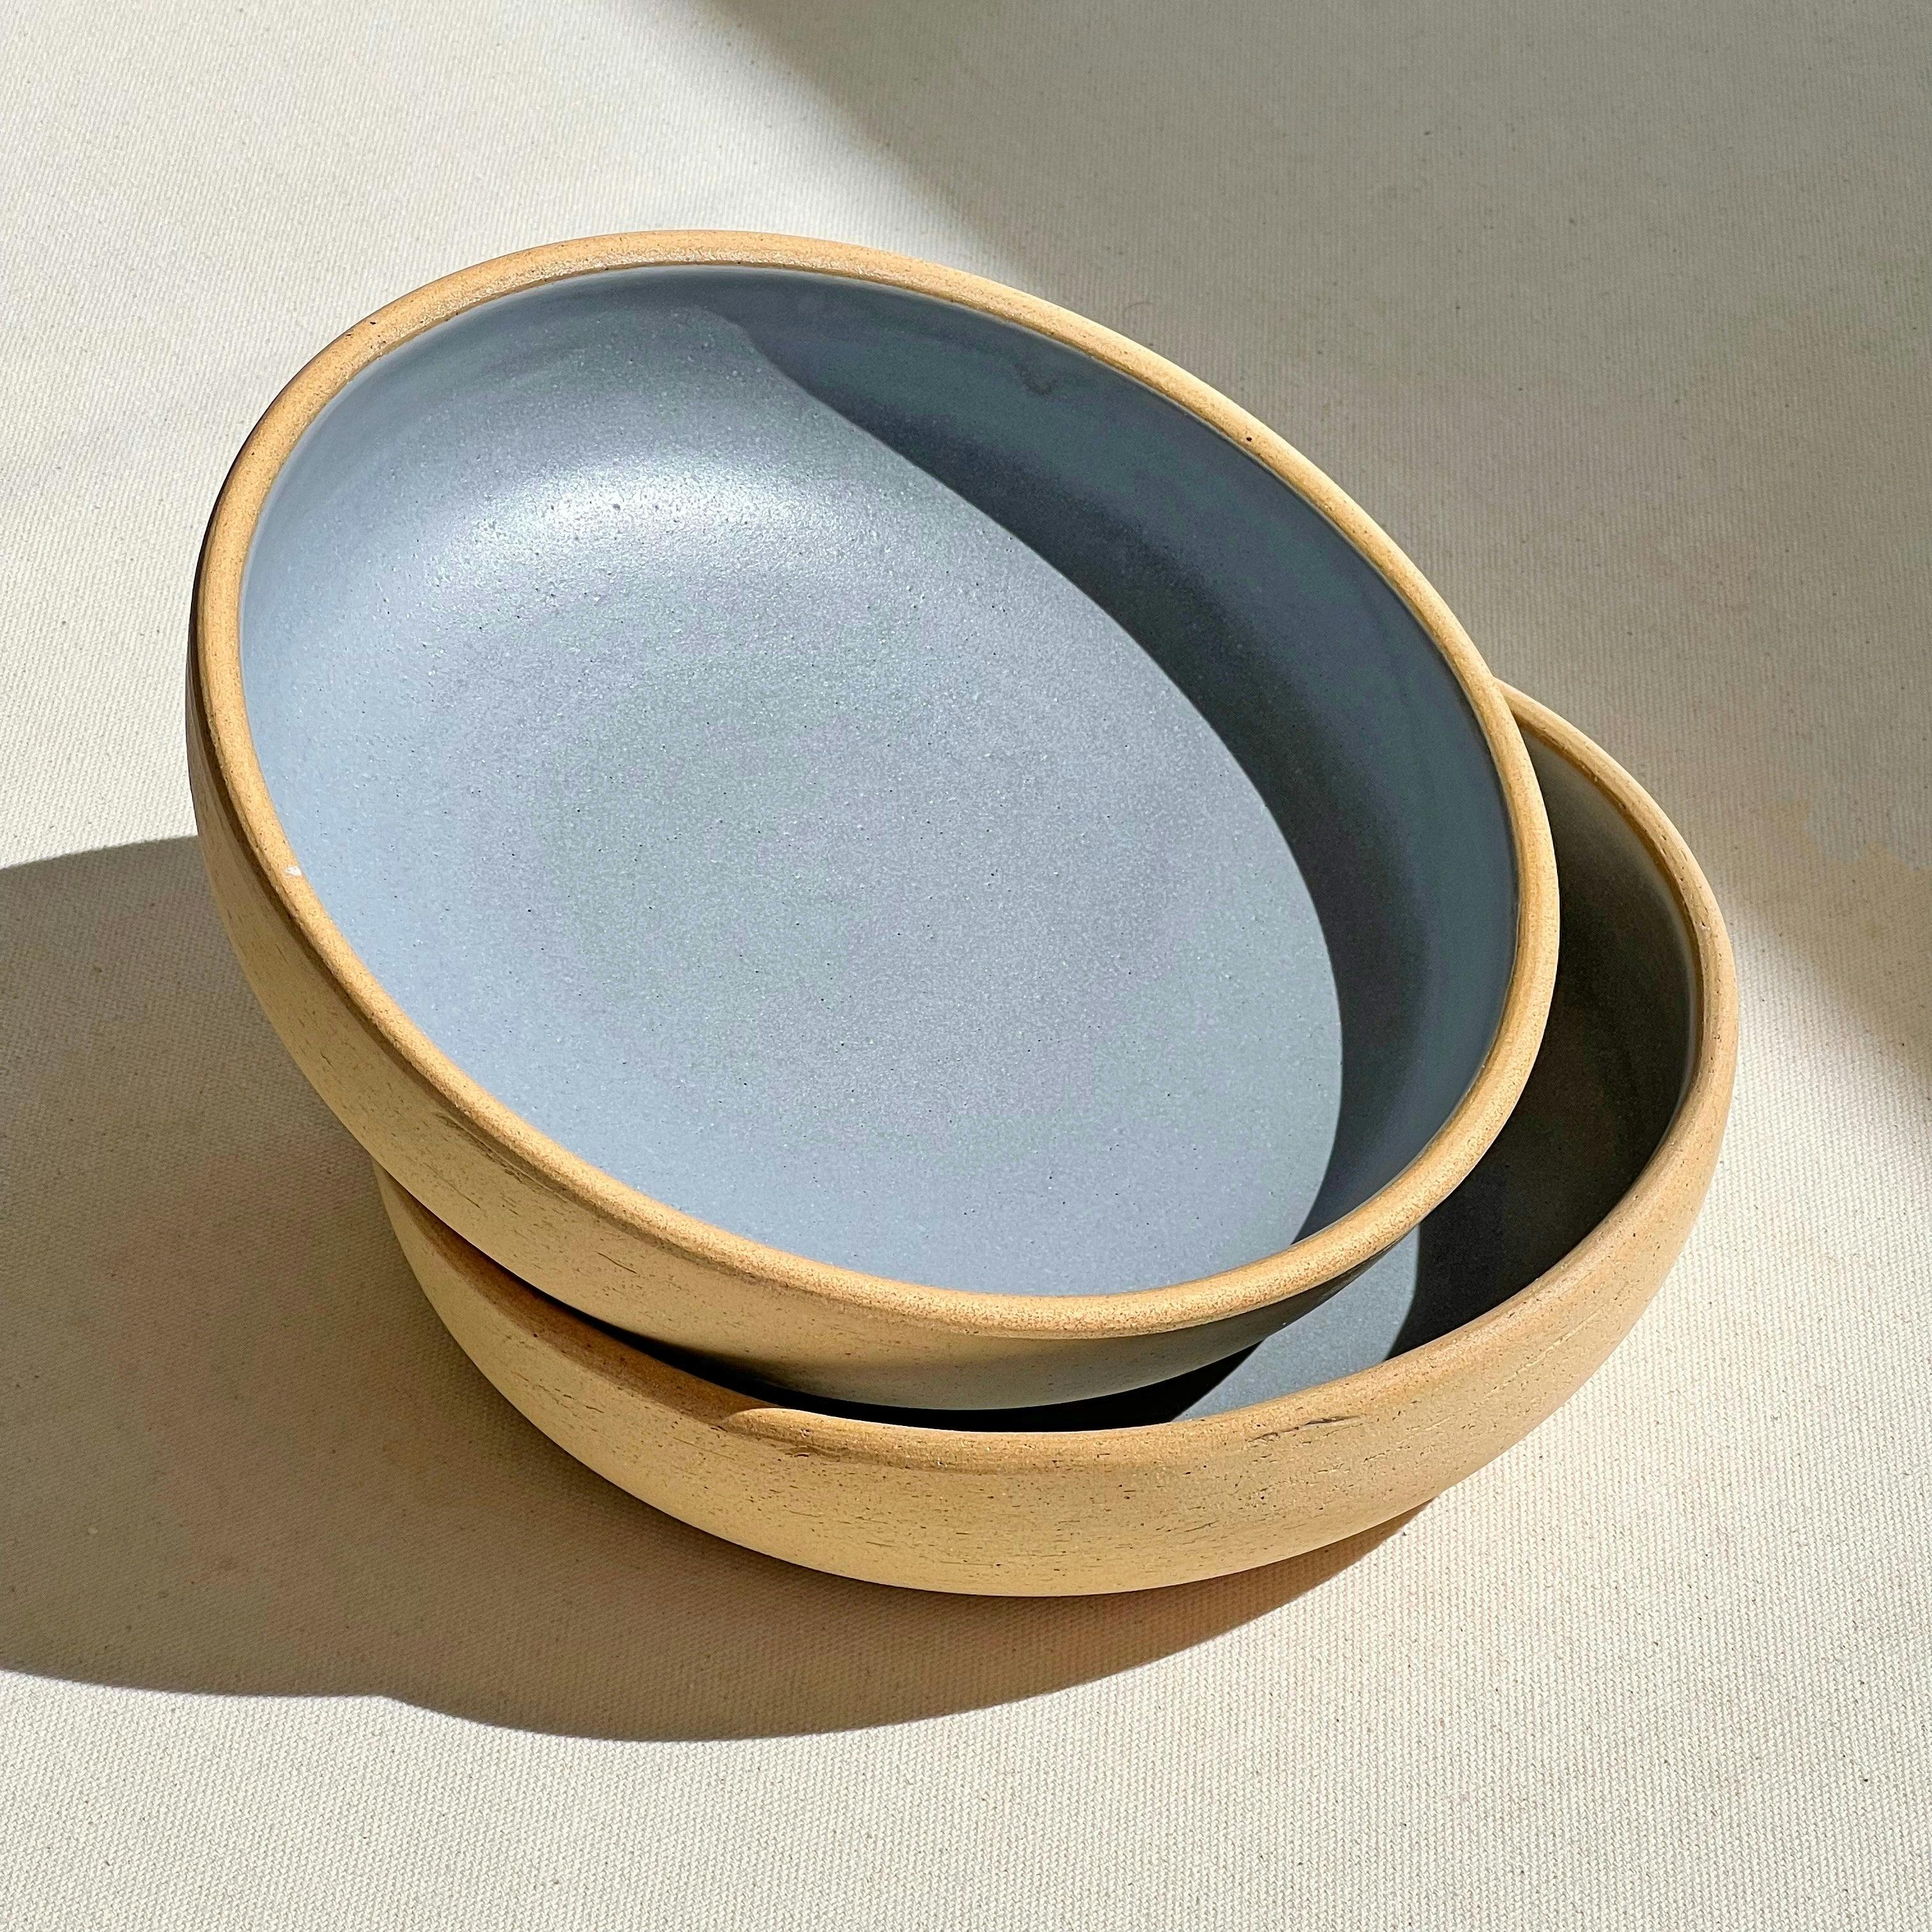 Coupe Pasta Bowl in Earl Grey, a product by Midori Collective